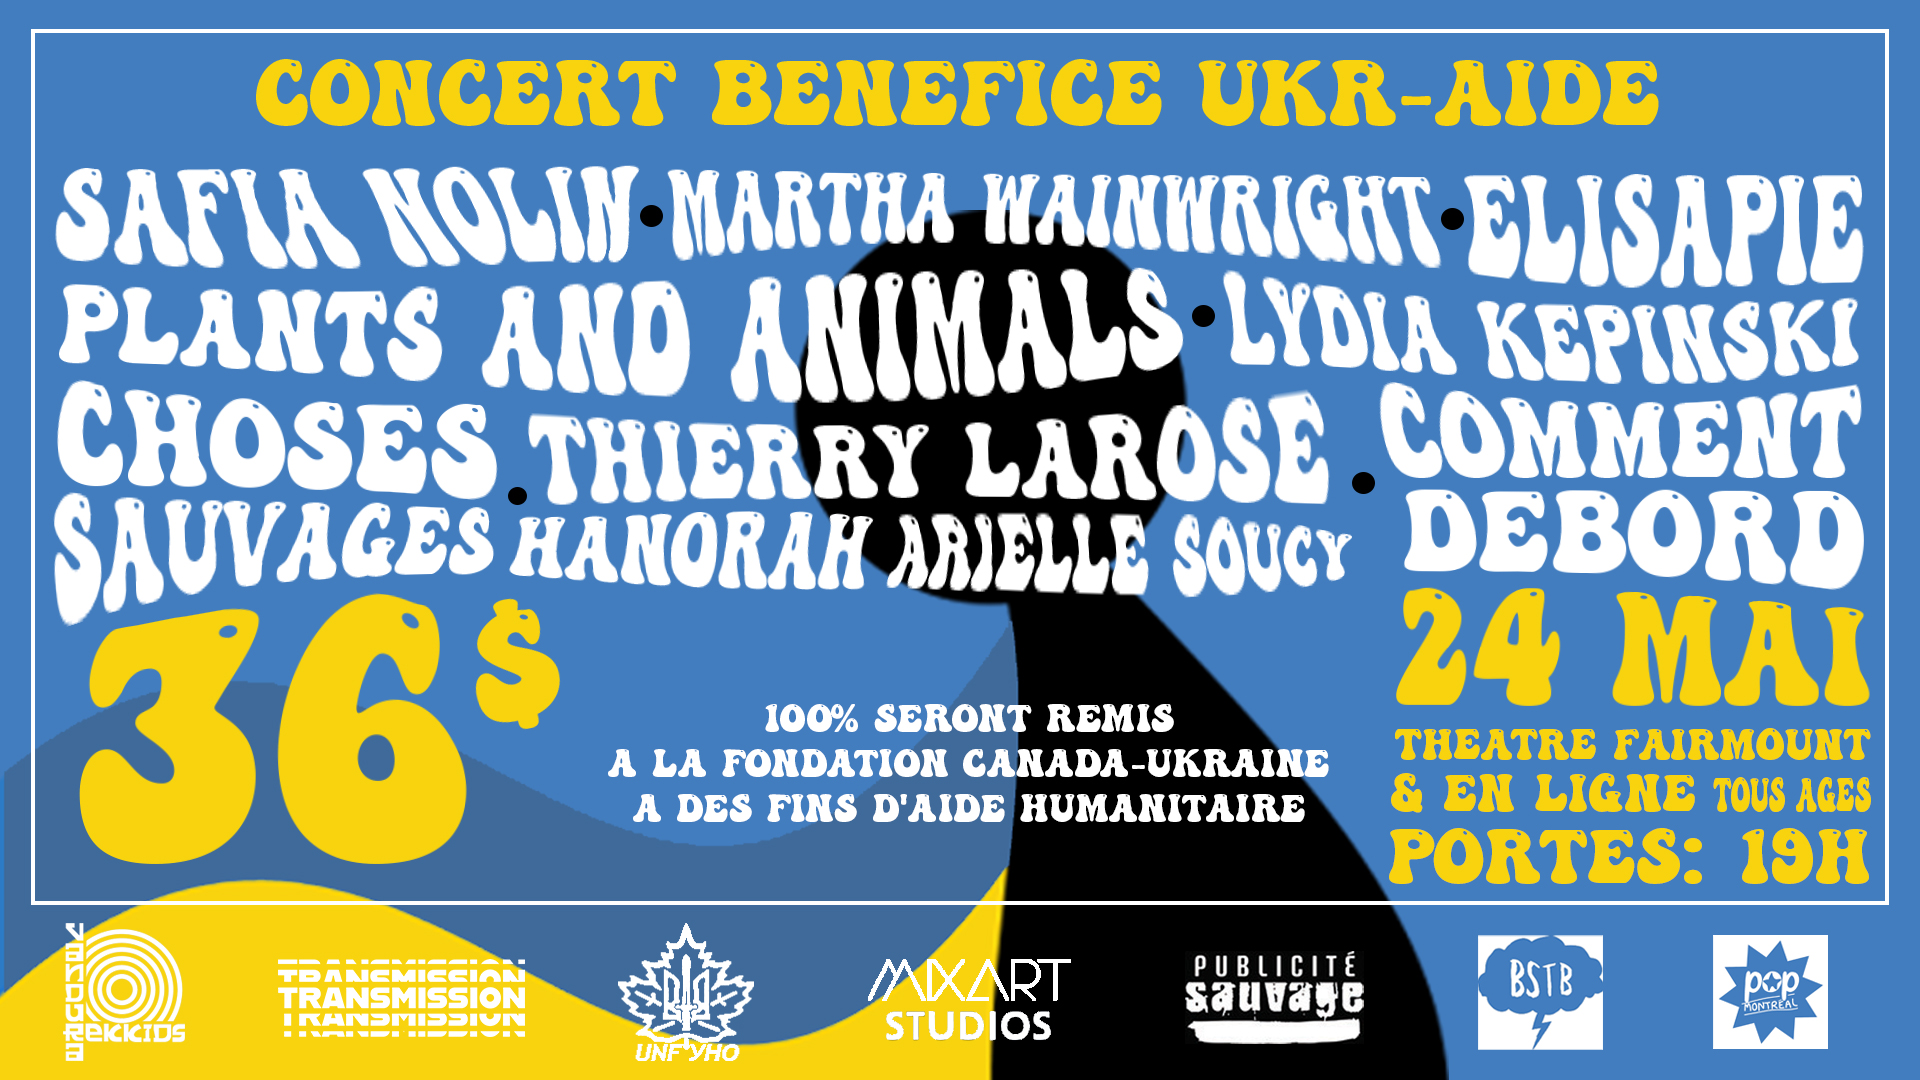 TUESDAY: The UKR-AIDE Benefit Concert with Safia Nolin, Martha Wainwright, Choses Sauvages & more